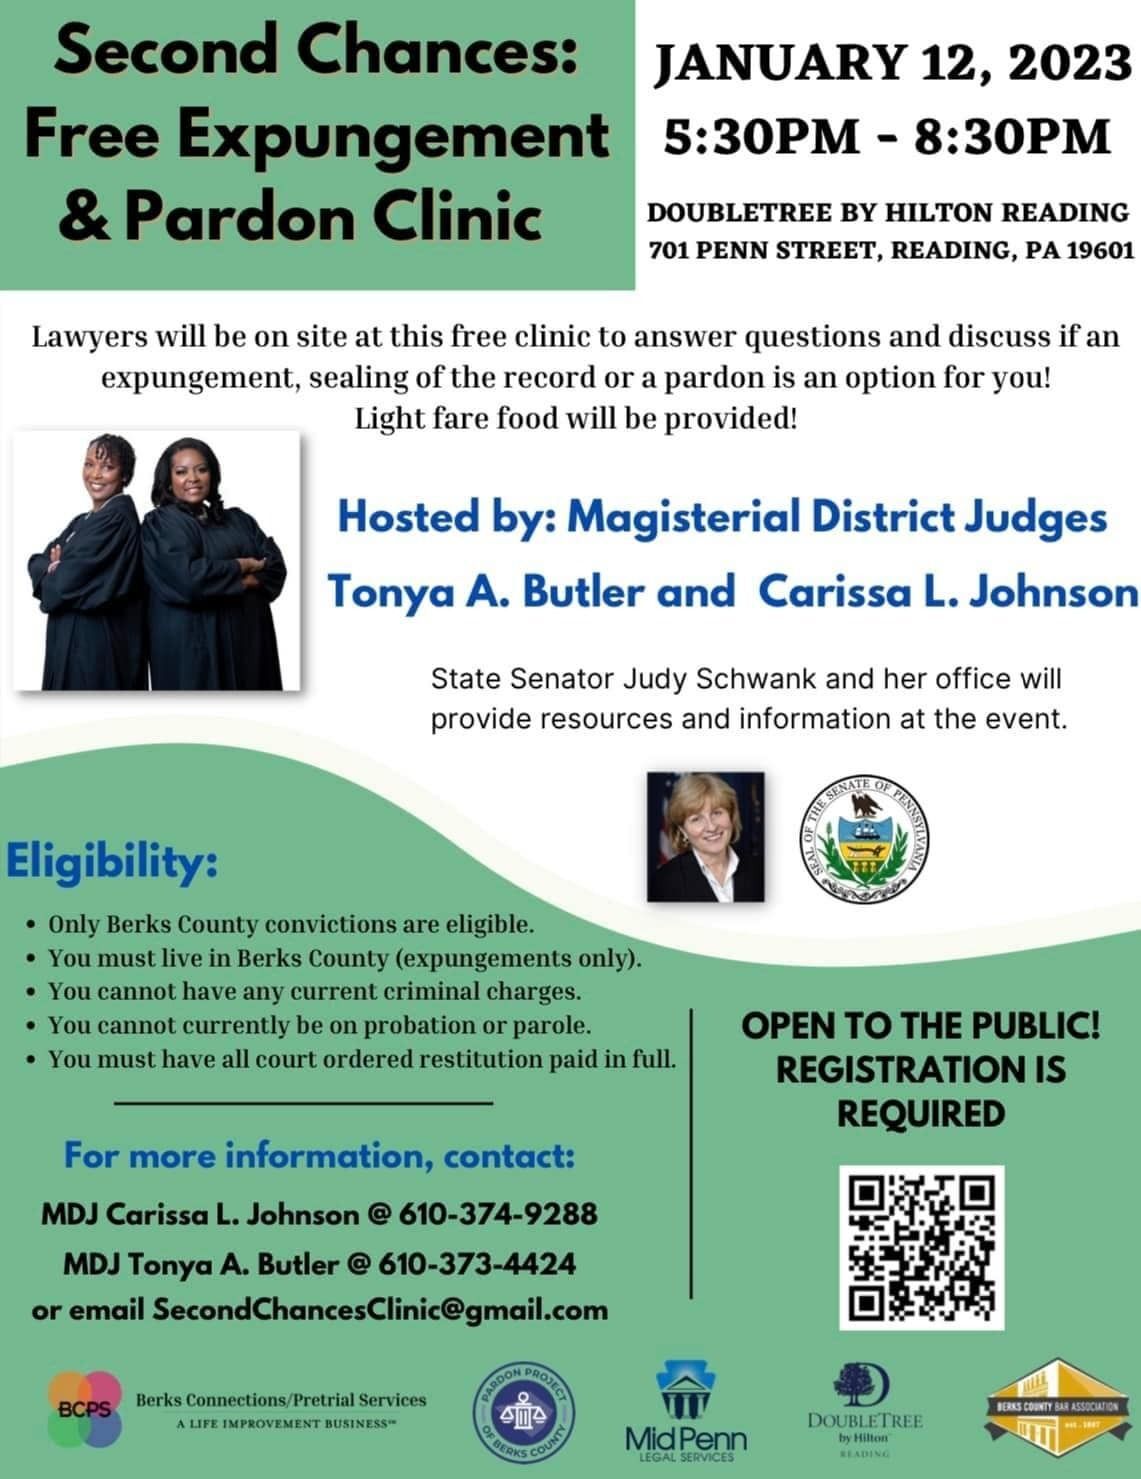 Free Expungement Clinic For more information email SecondChances@gmail.com